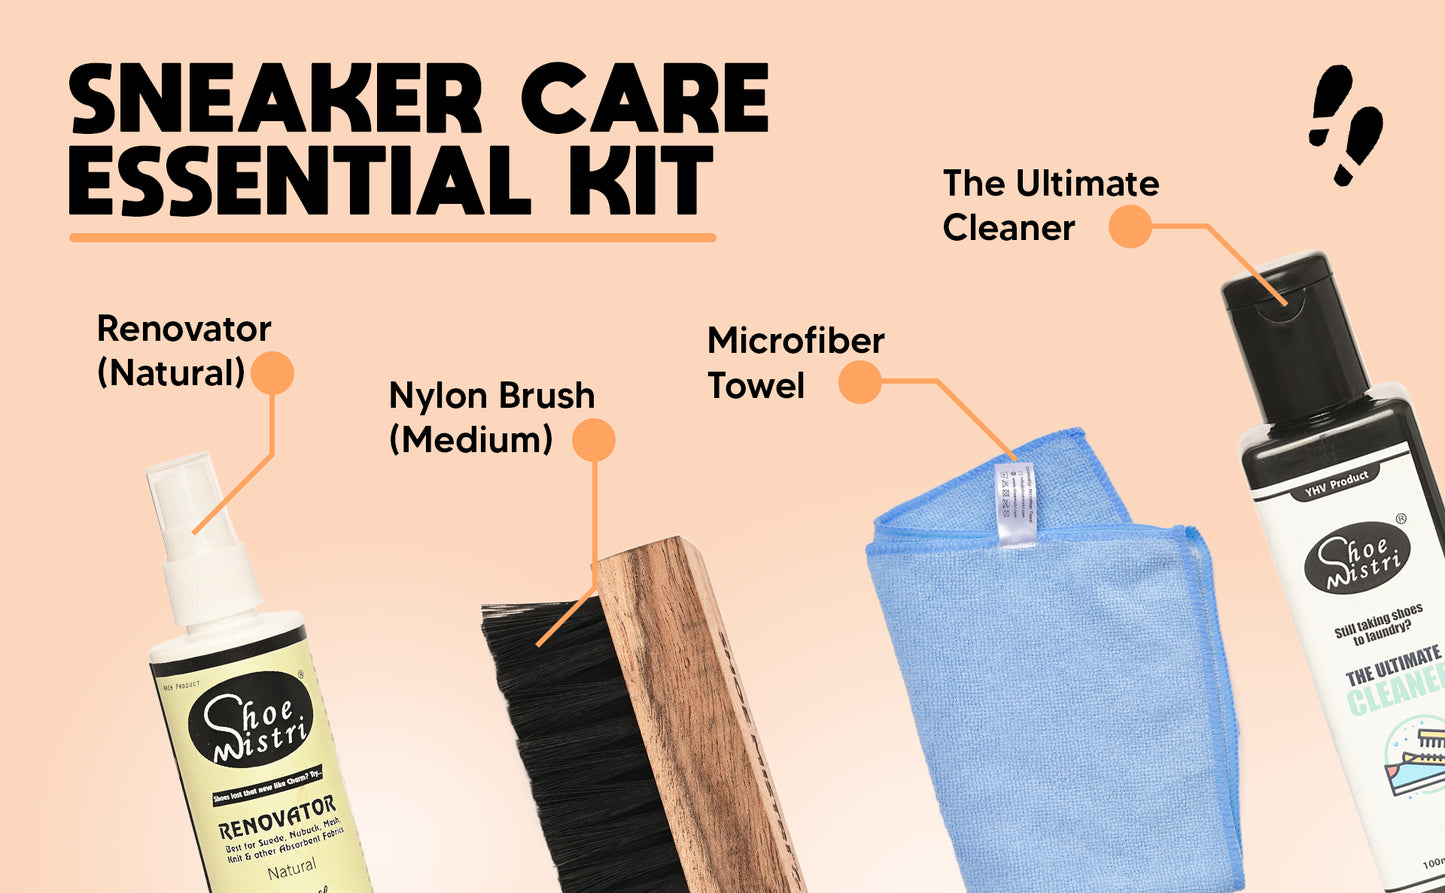 Shoe Mistri Mini Sneaker Care Essentials Drawer | Pack Of Ultimate Cleaner, Renovator, and Sneaker Brush with Microfiber Towel | Best for Cleaning, Shining & Buffing Sneakers & Other Absorbent Materials